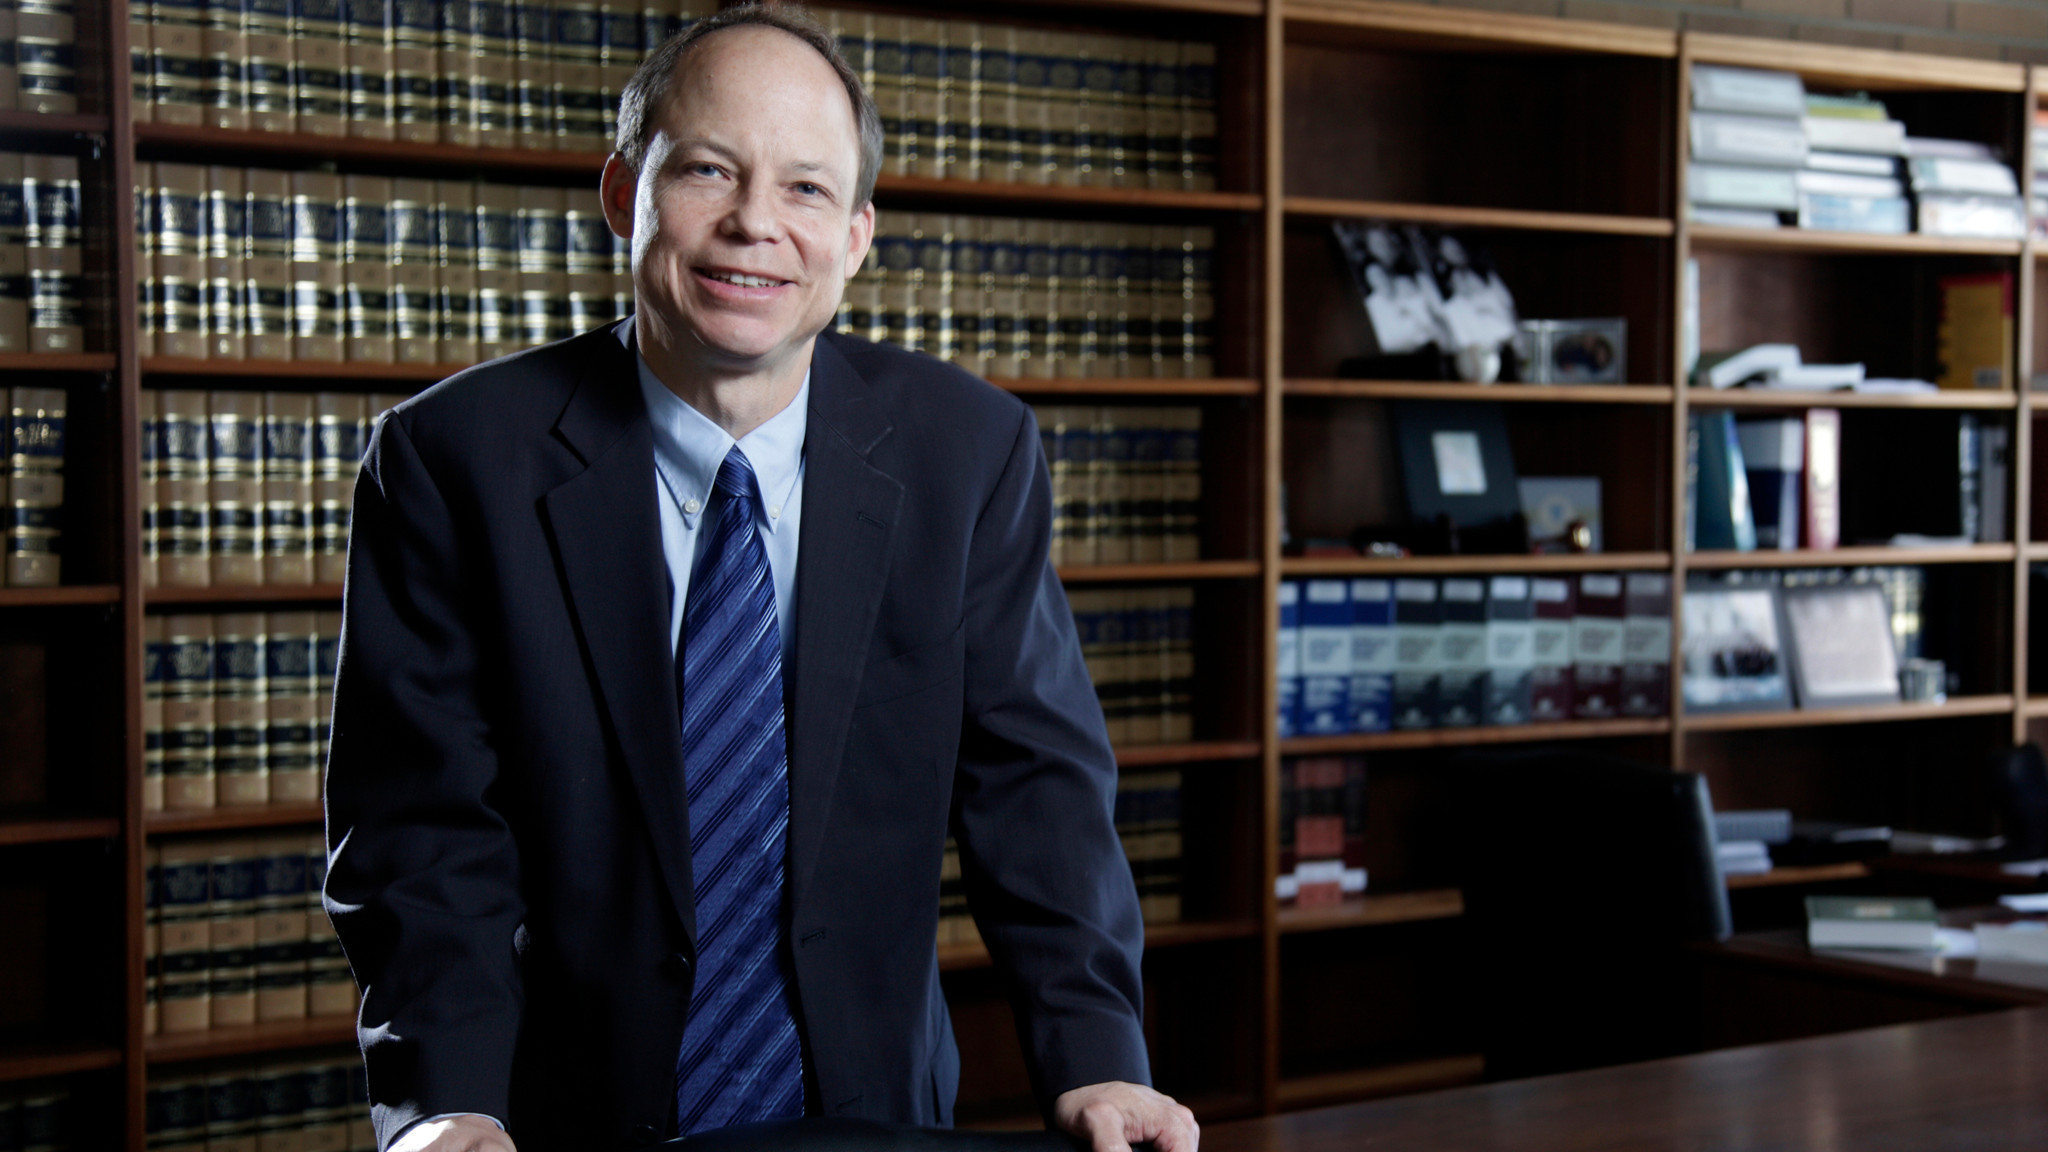 Judge Who Issued Controversial Sentence In Stanford Trial Removed From